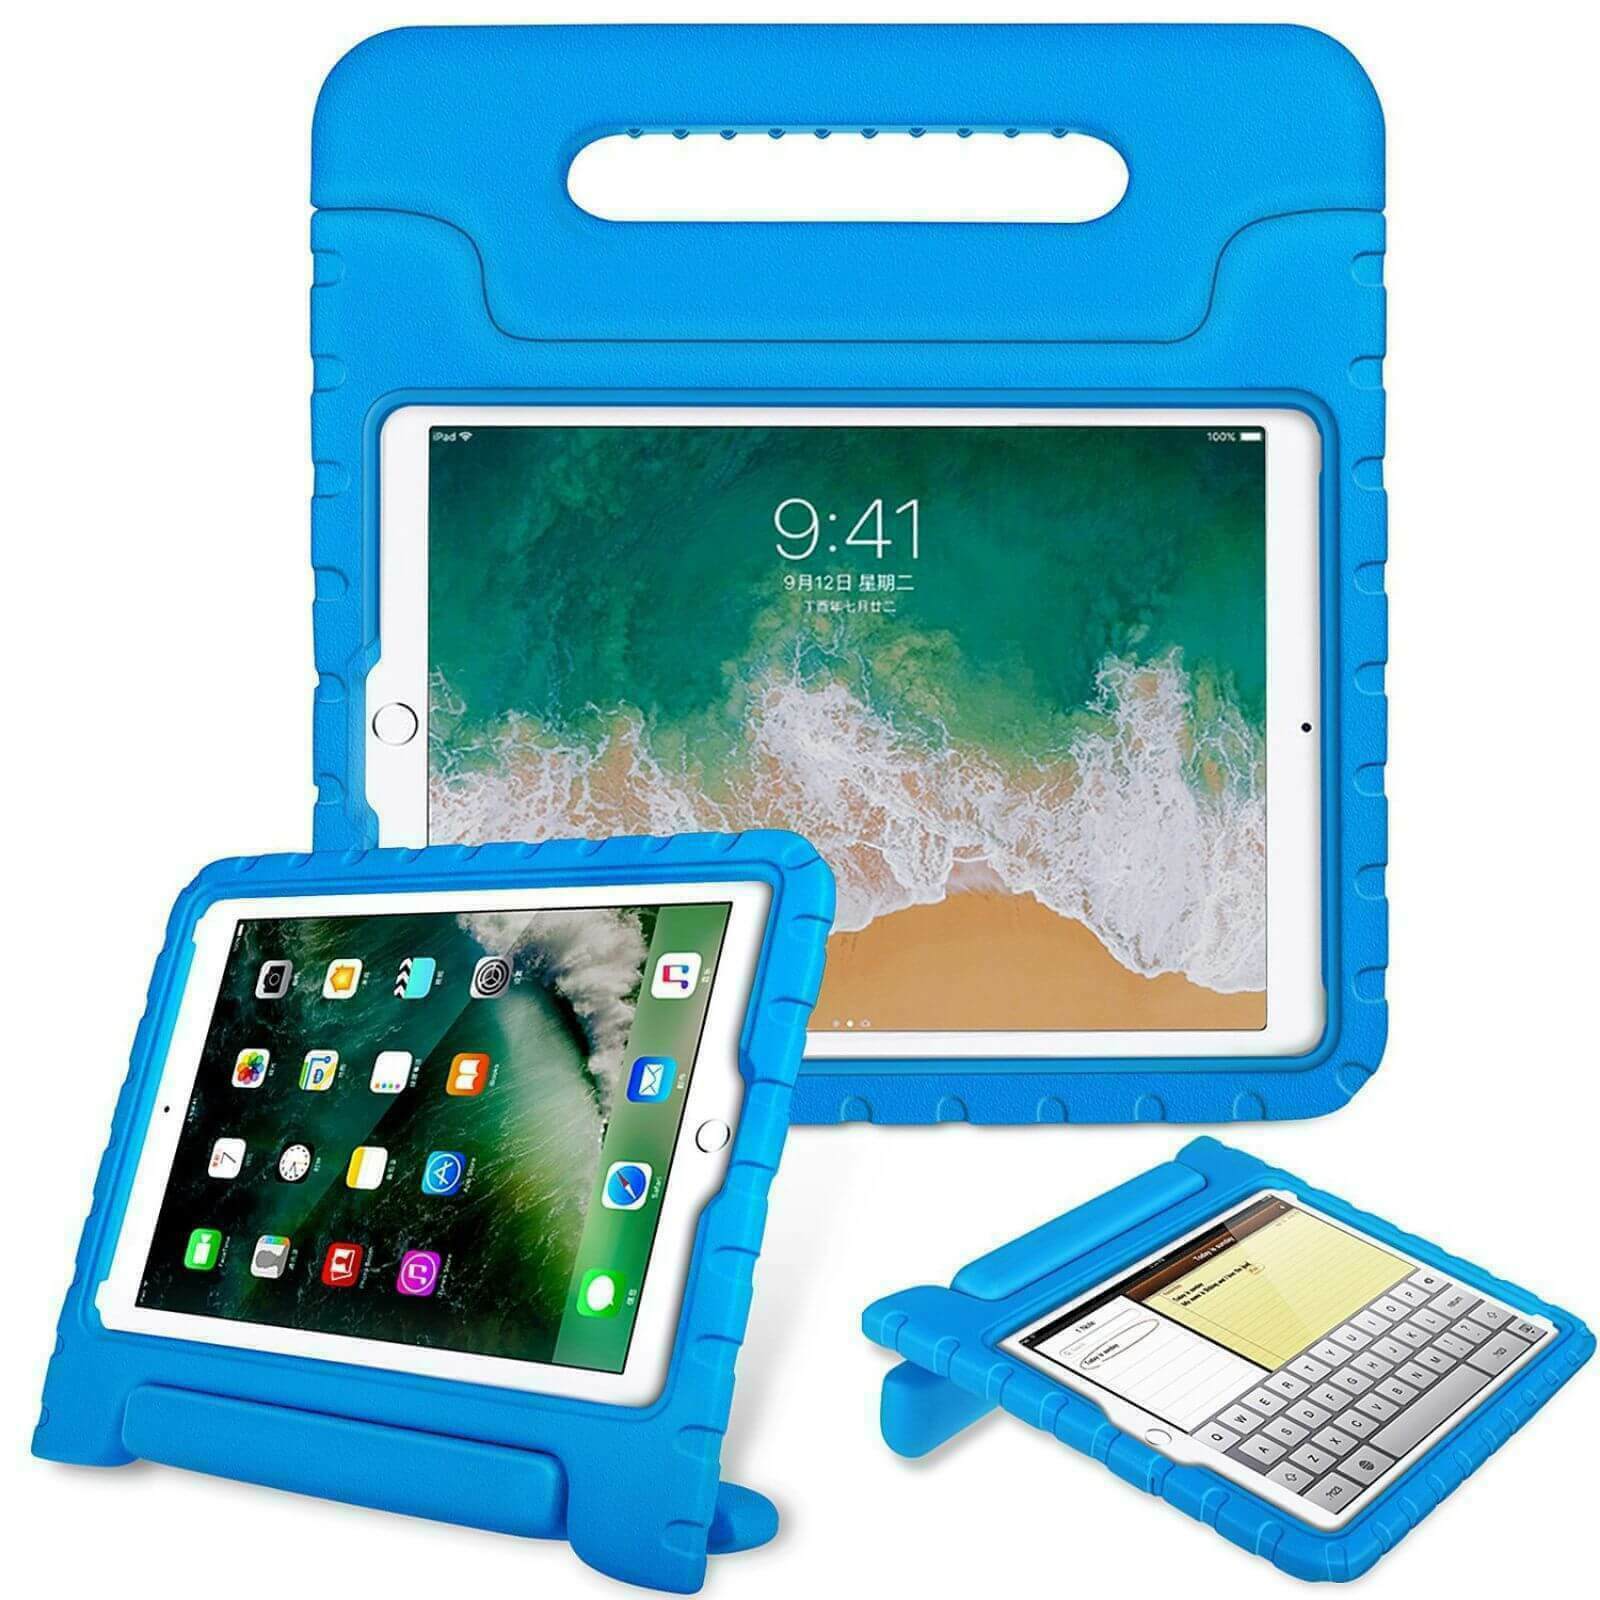 For Apple iPad Mini 1 2 3 Kids Case Shockproof Cover With Stand Blue